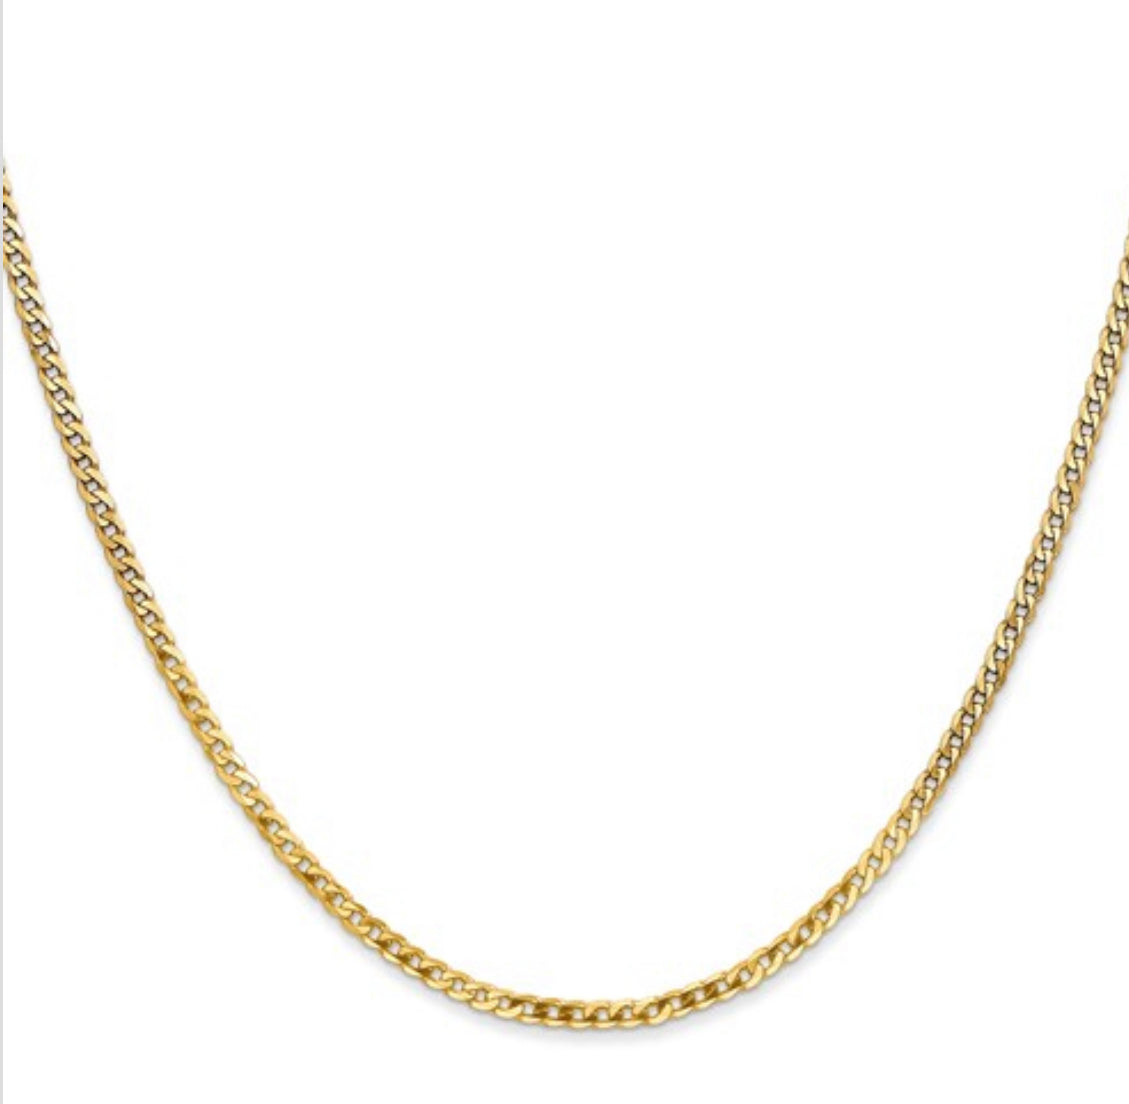 10K Yellow Gold Flat Beveled Curb Chain - 2.2mm